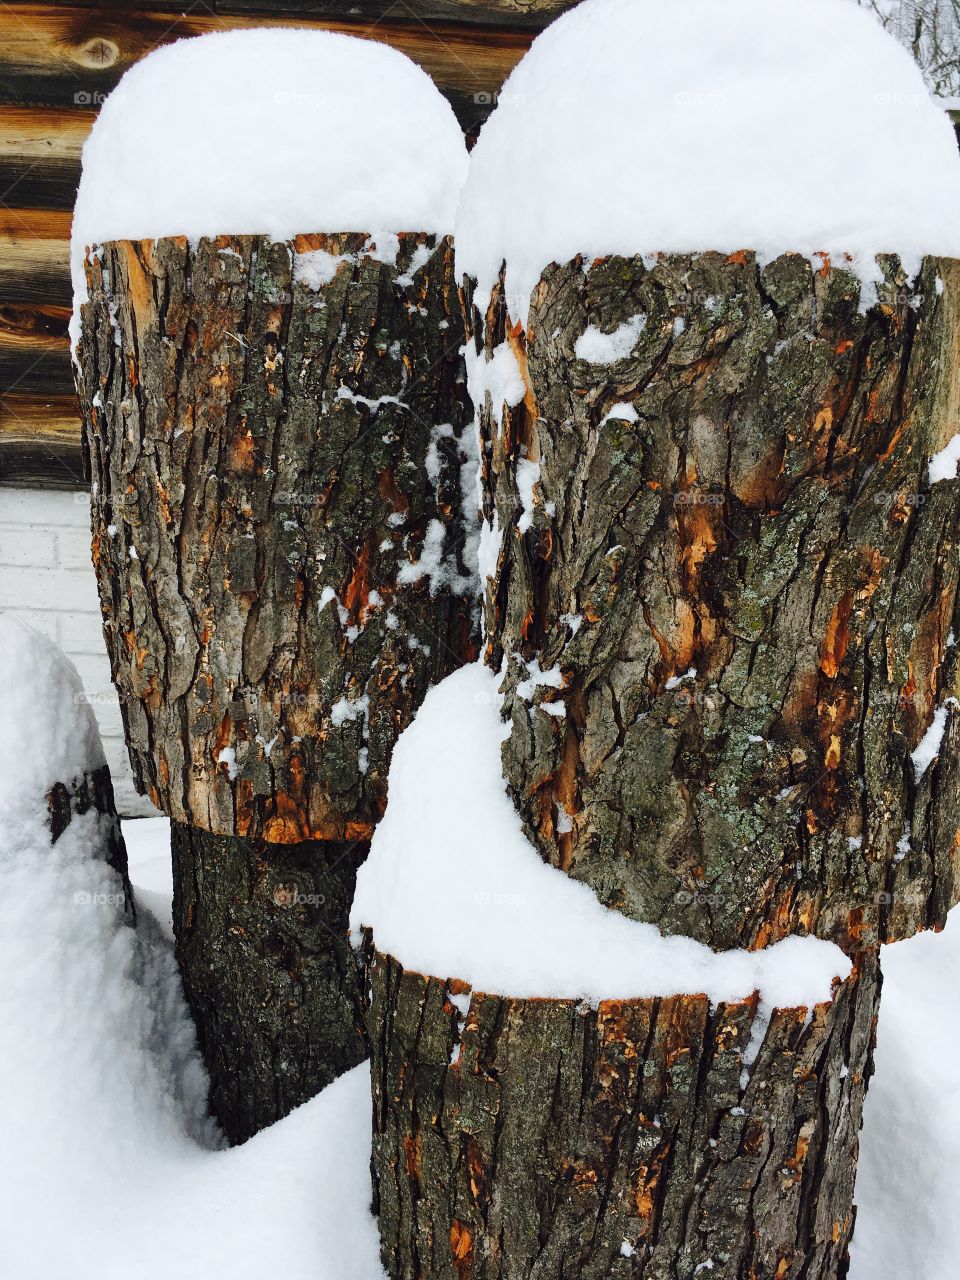 Log "sentinels" during a March snowstorm in Virginia 